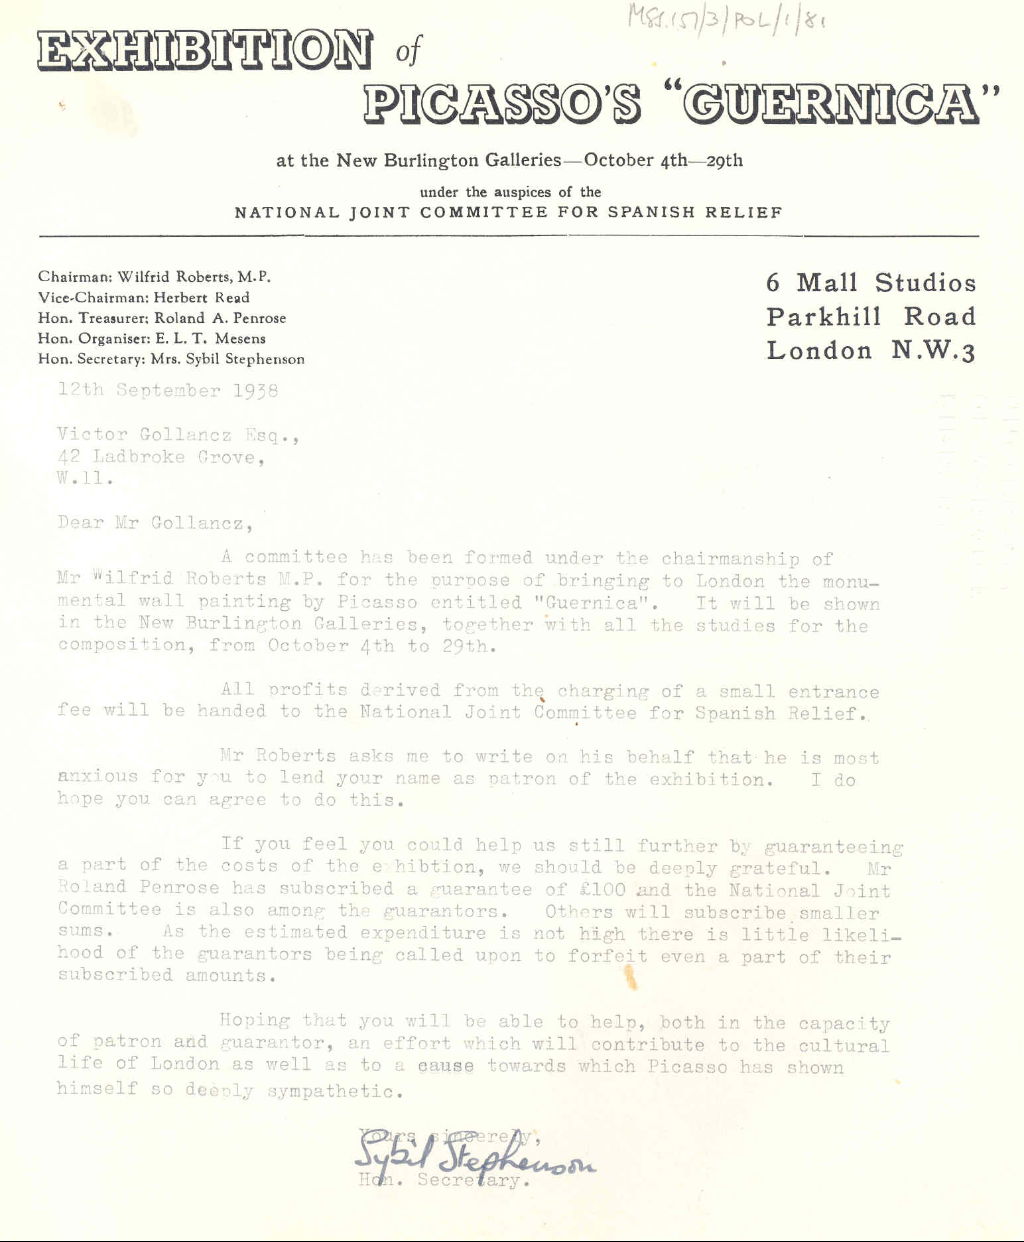 Letter to Victor Gollancz, asking him to act as a patron of the exhibition of Picasso's 'Guernica' in London, 1938